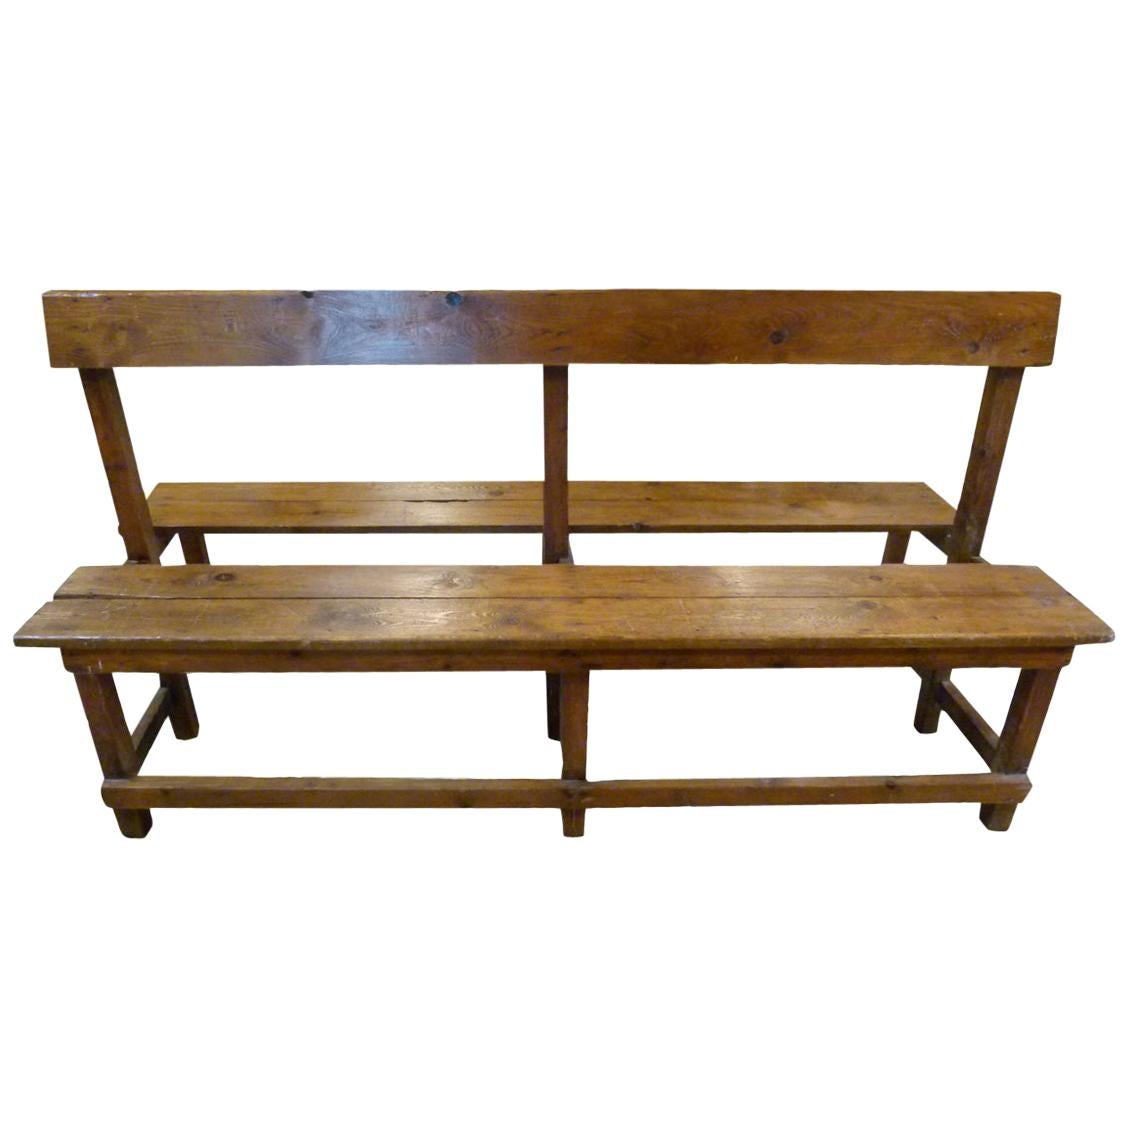 19th Century Wooden Double Sided Spanish Bench